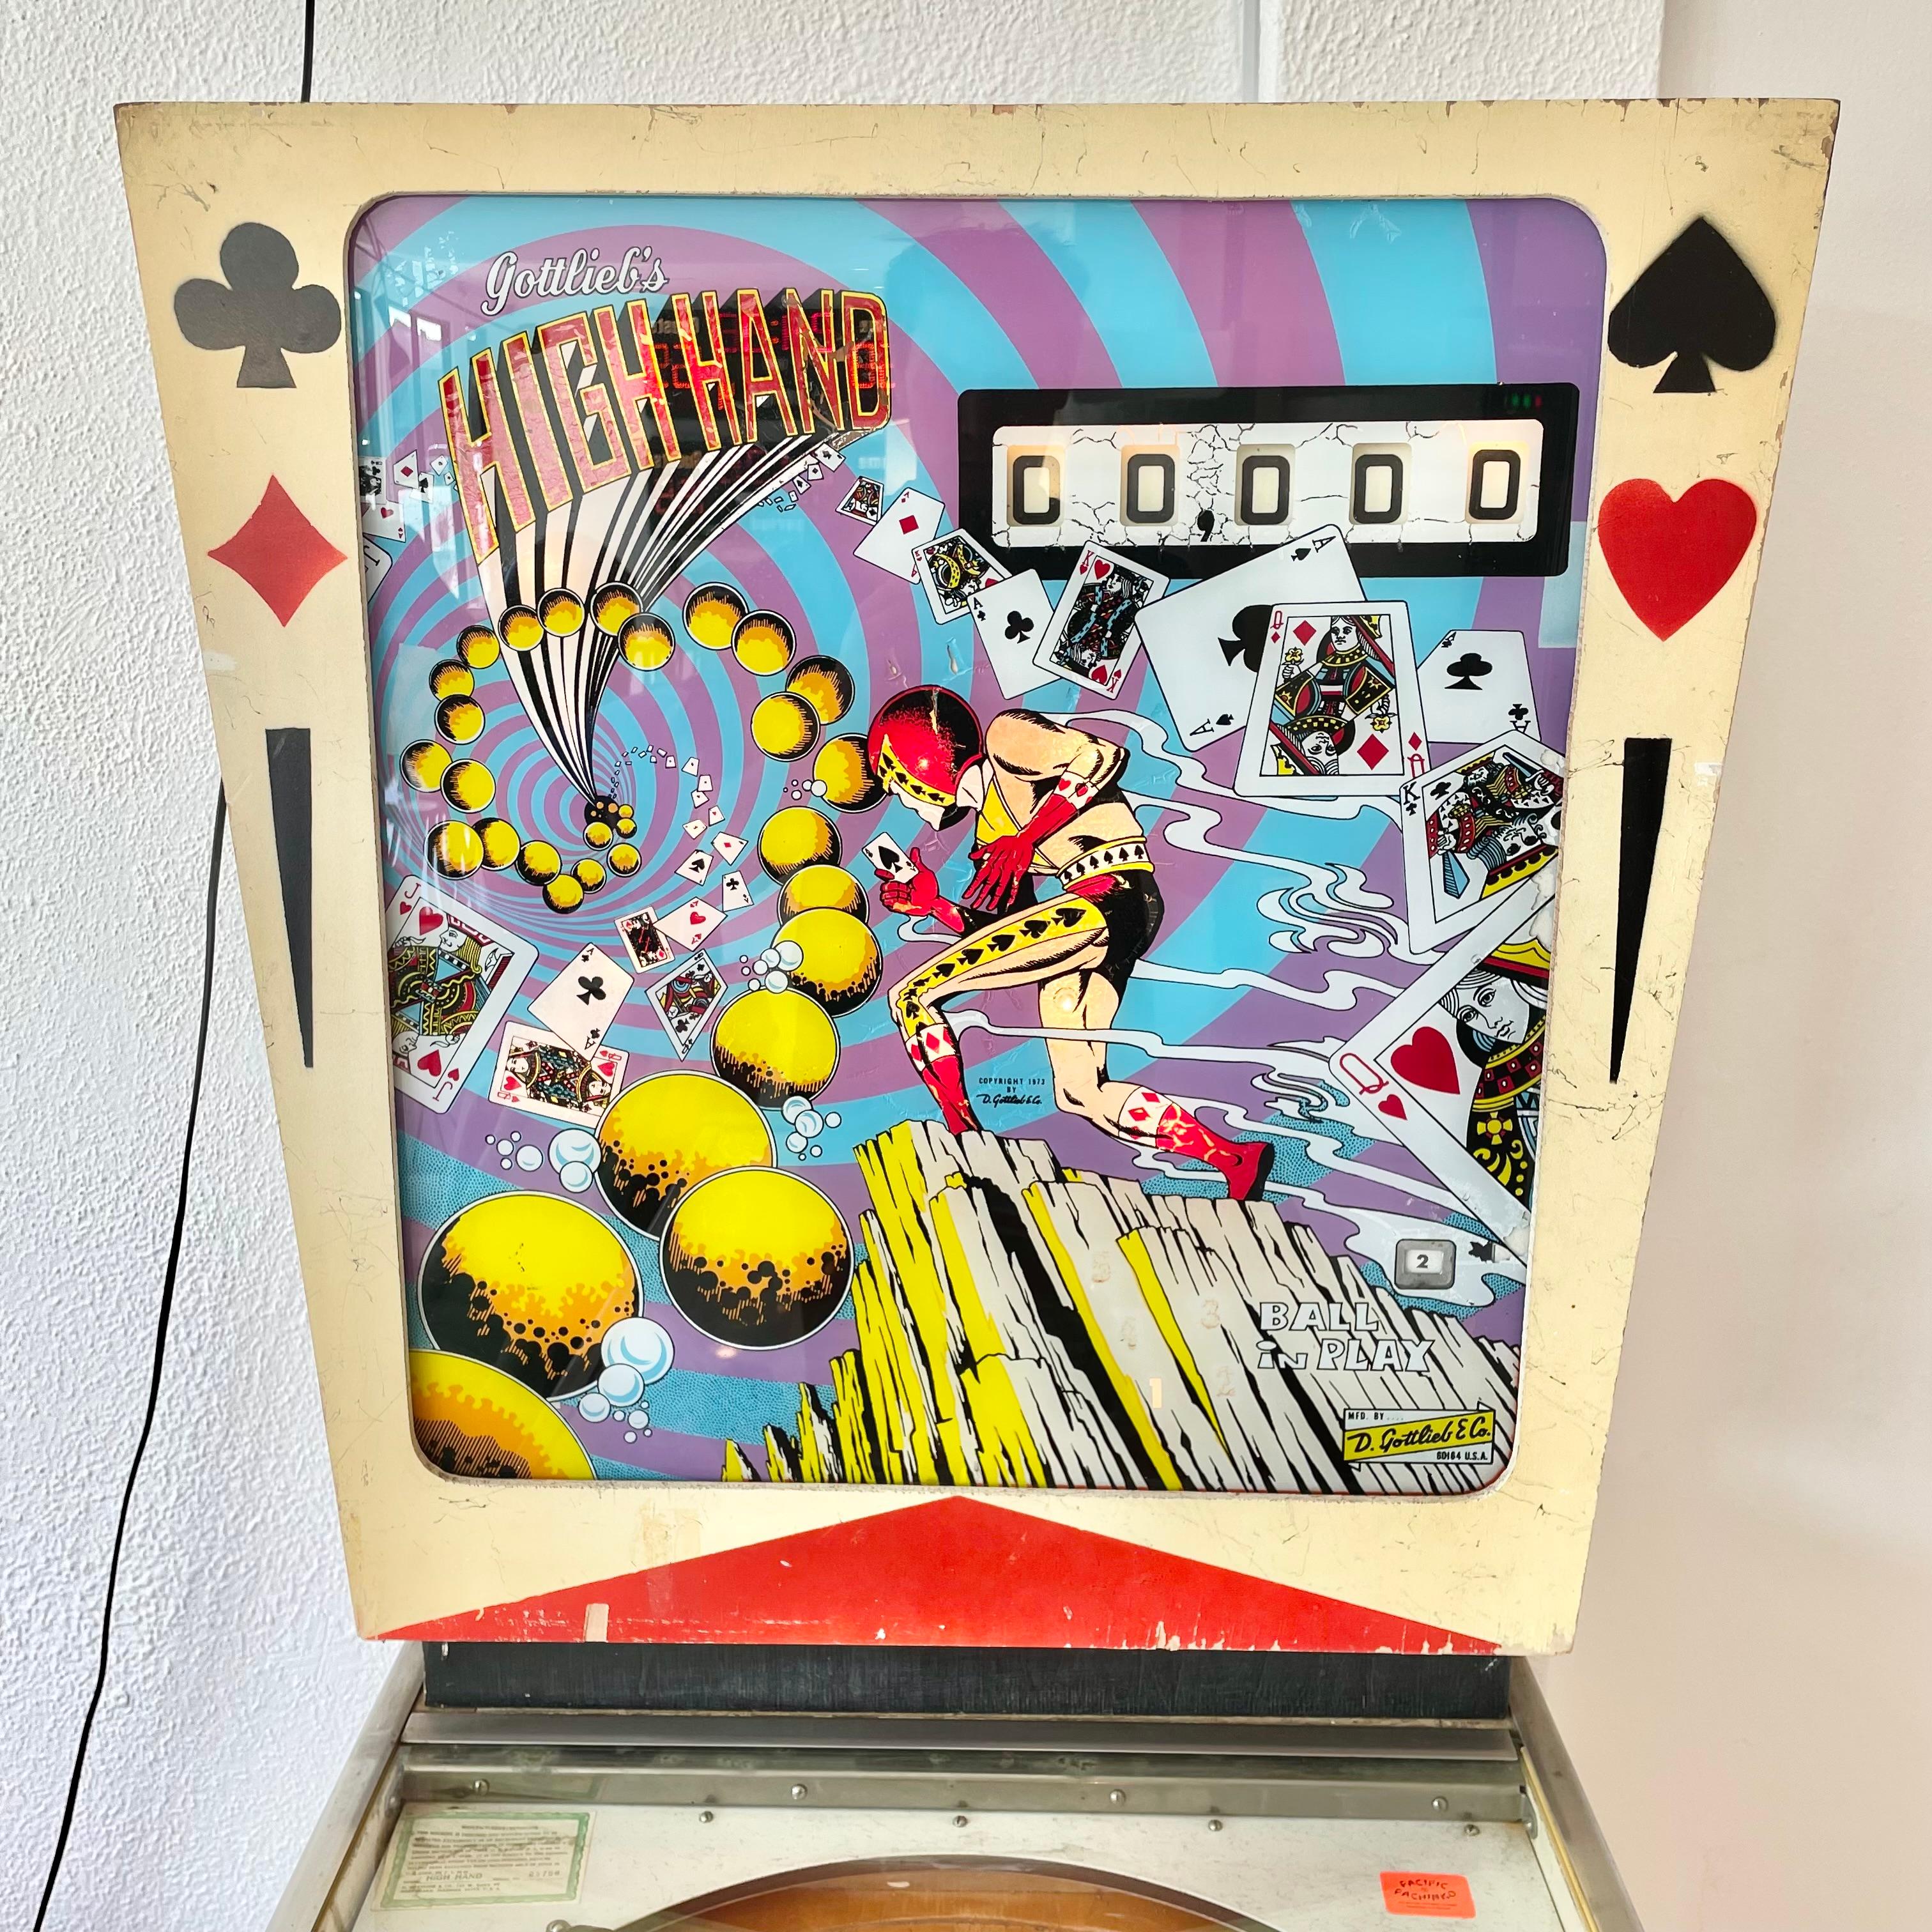 Vintage 'HIGH HAND' pinball machine from 1973. Made by D. Gottlieb & Company and designed by Ed Krynski. In excellent working condition. Great visuals and sounds. Extremely fun paced gameplay. This game features slingshots, drop targets, kick out